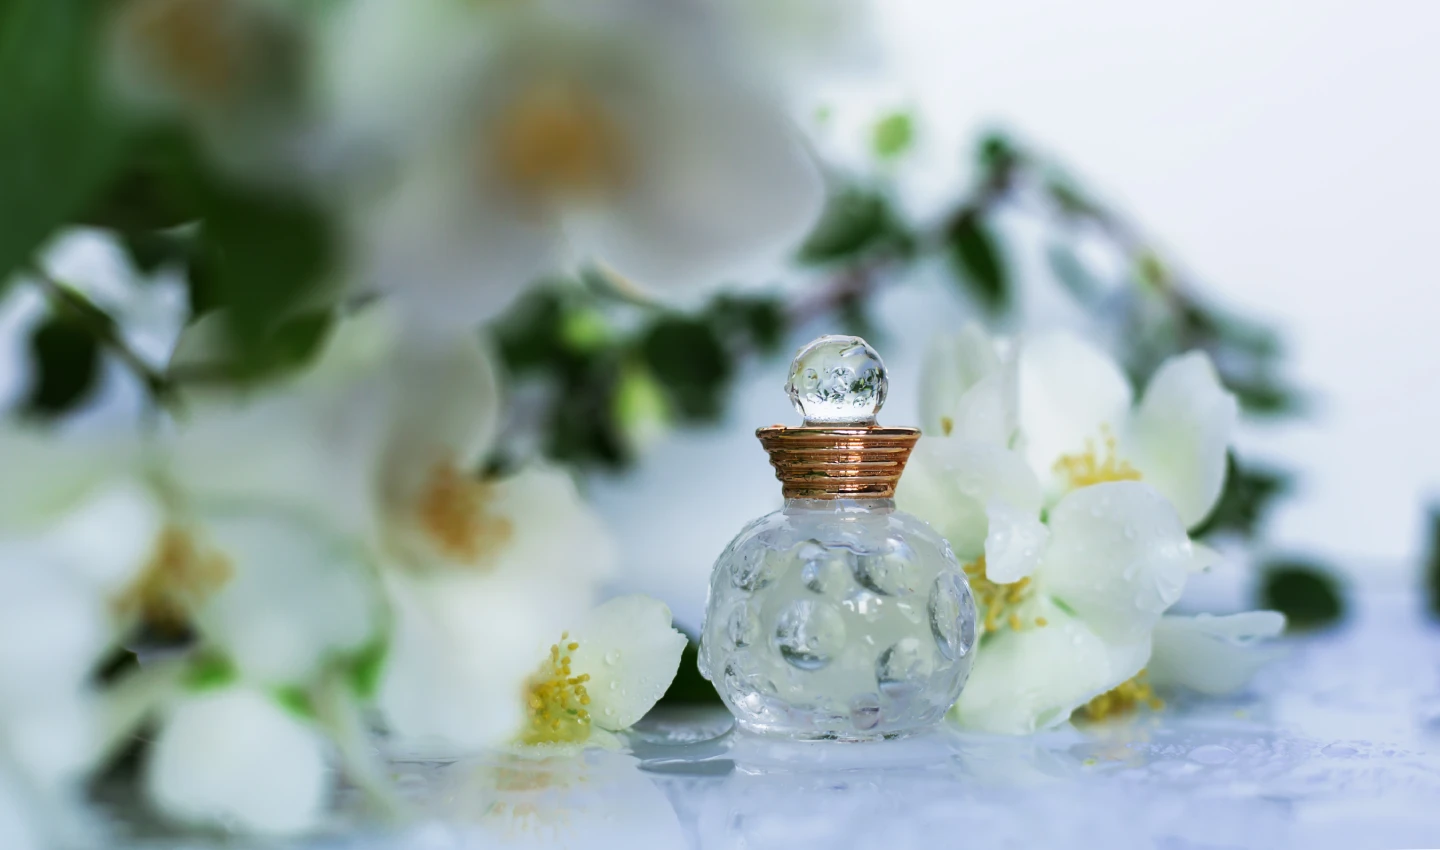 A bottle of artisanal perfume set against a lush natural backdrop, symbolizing the harmony between fragrance notes and nature.